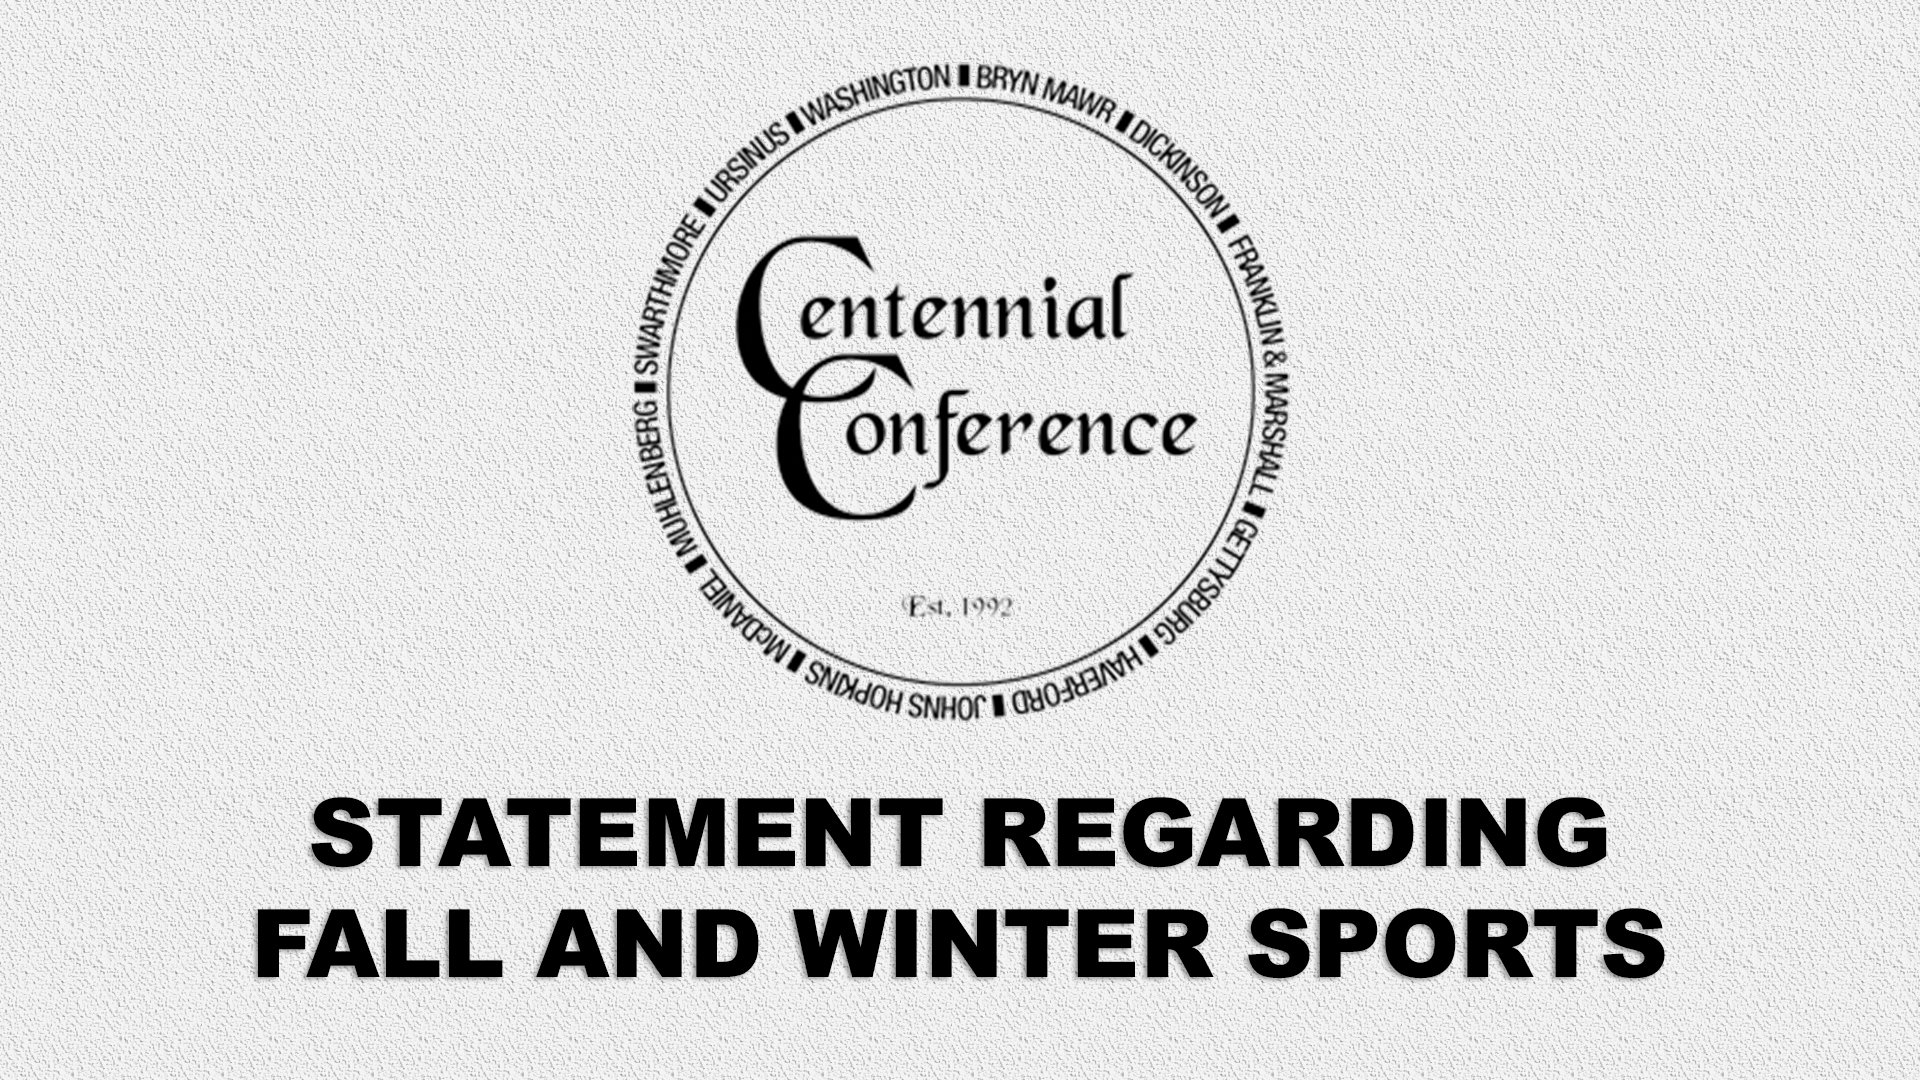 Centennial Conference Statement Regarding Fall and Winter Sports